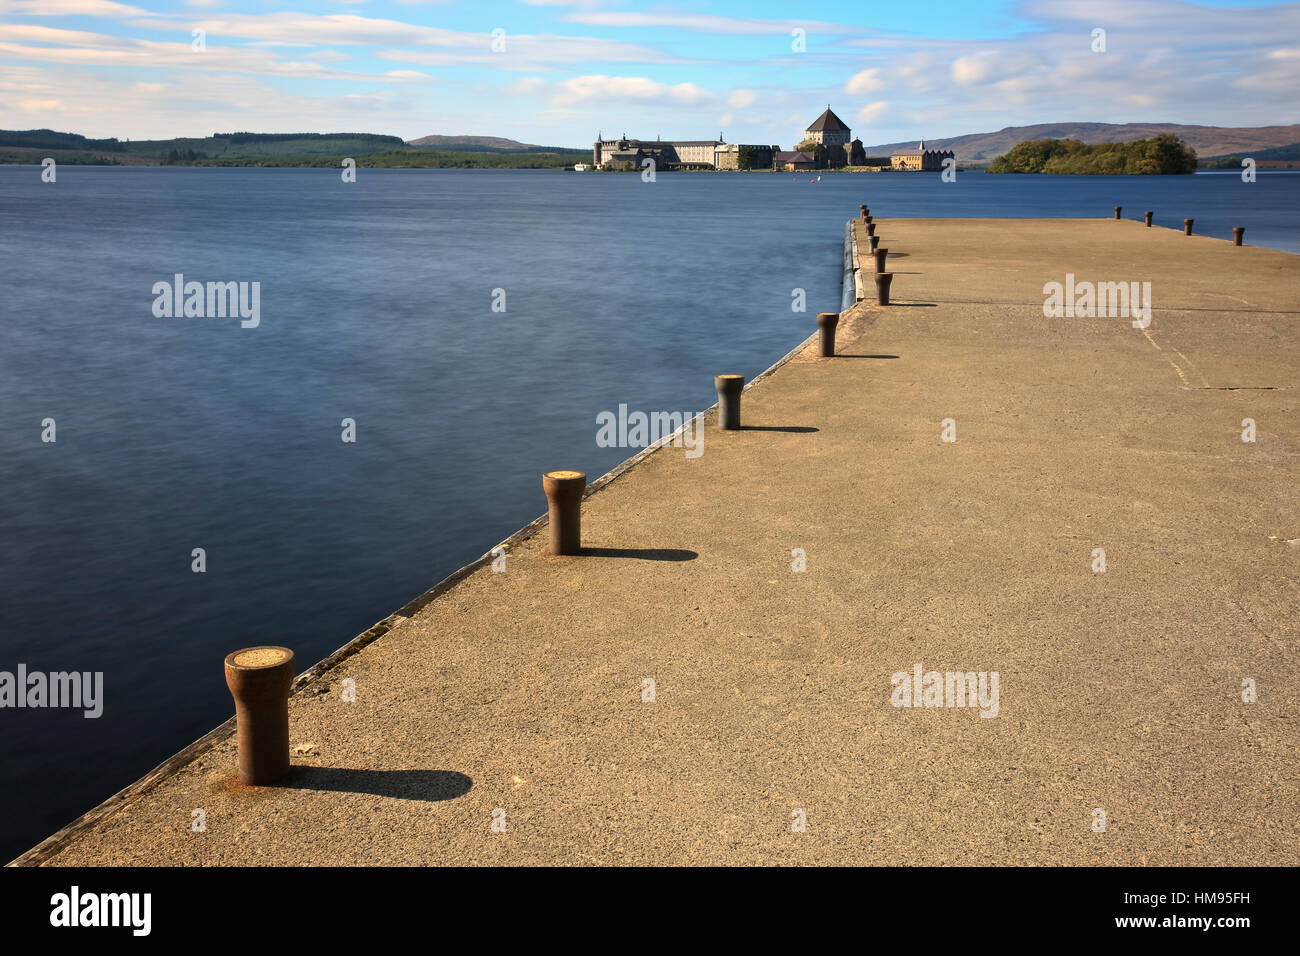 Lough Derg, Ulster County Donegal, Irland Stockfoto